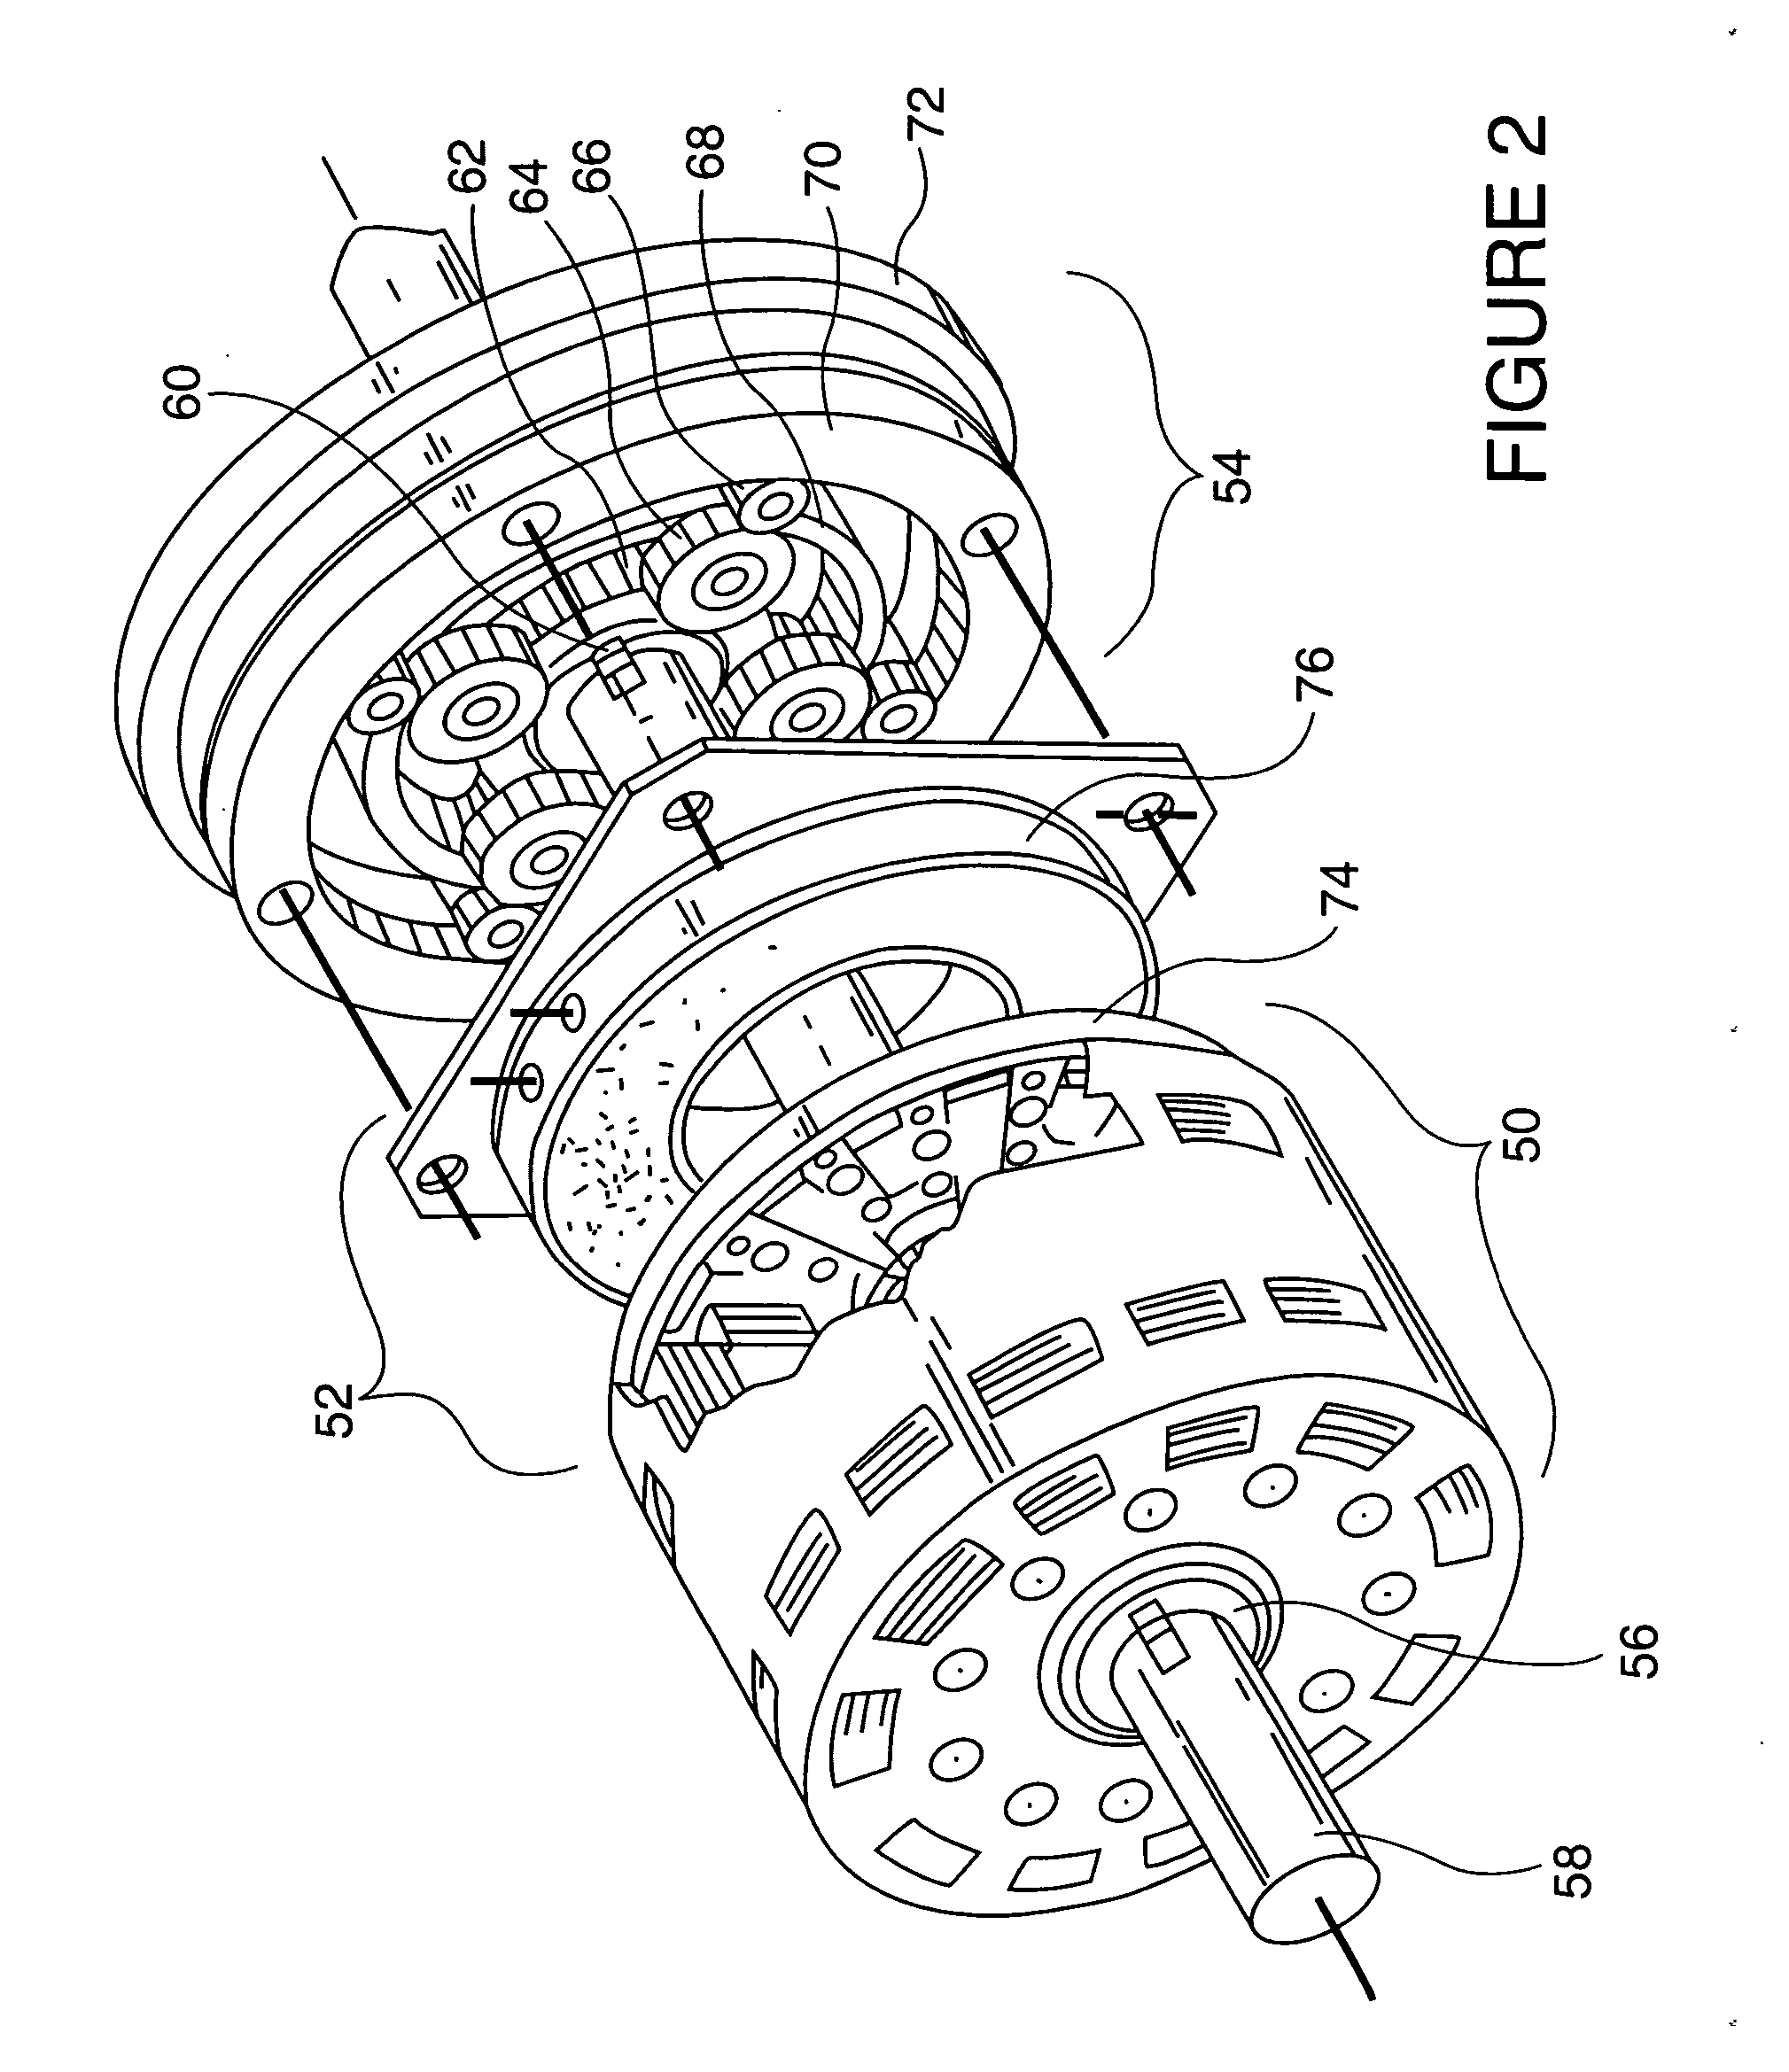 Rotary engine with improved hybrid features